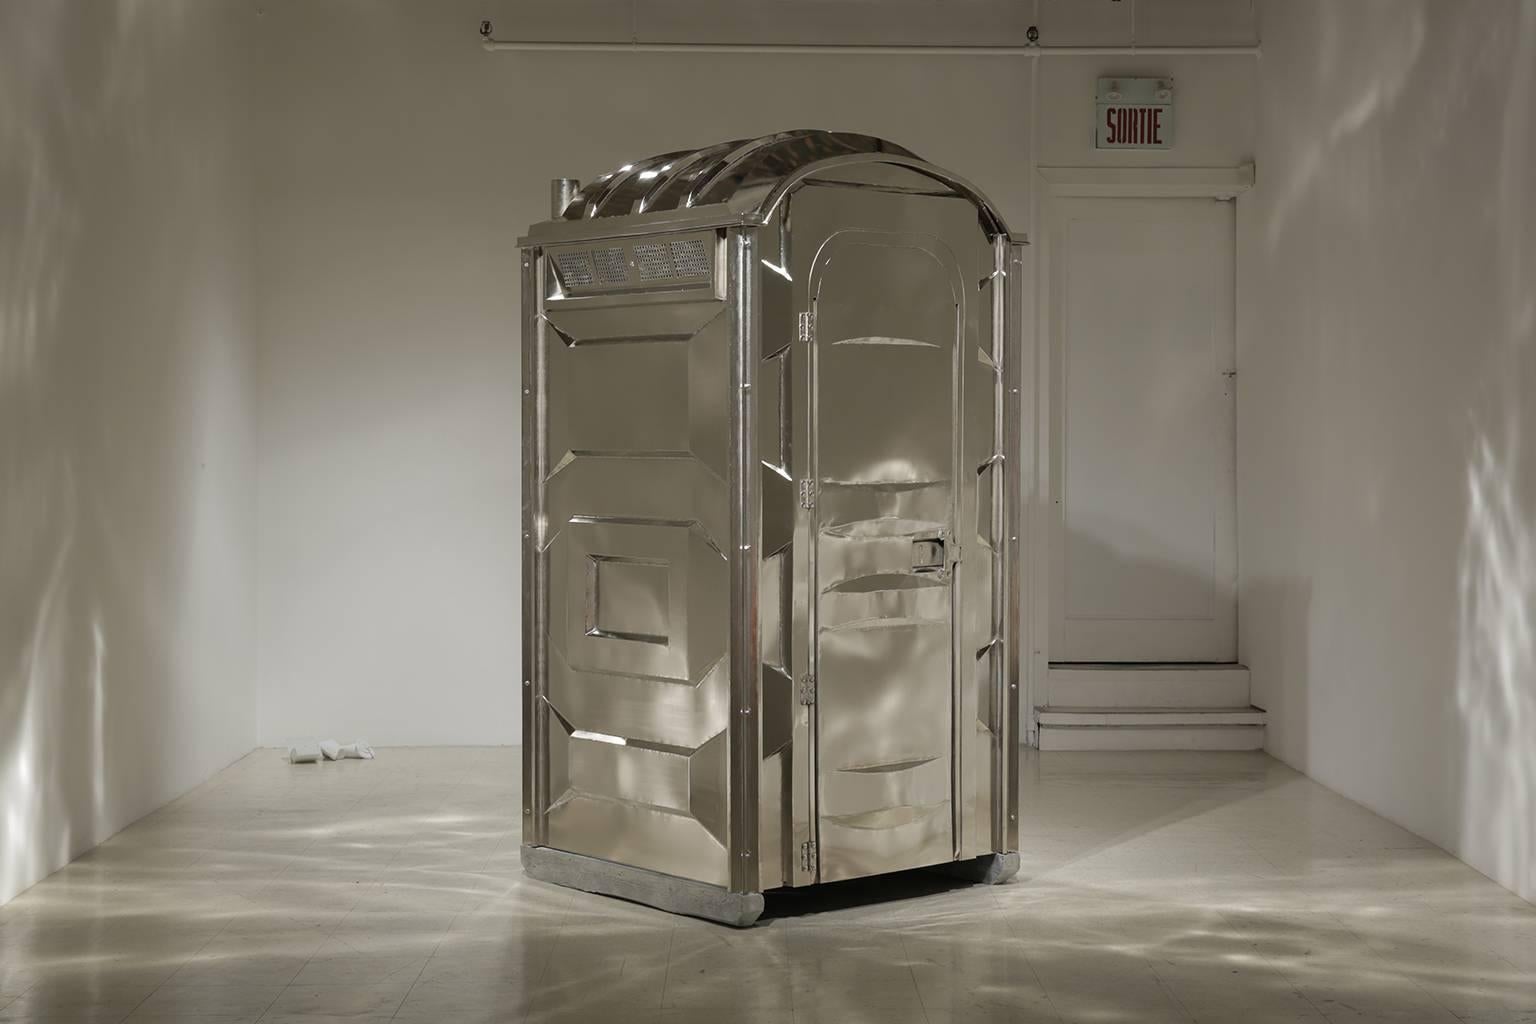 Port-O-Potty - Sculpture by Zeke Moores